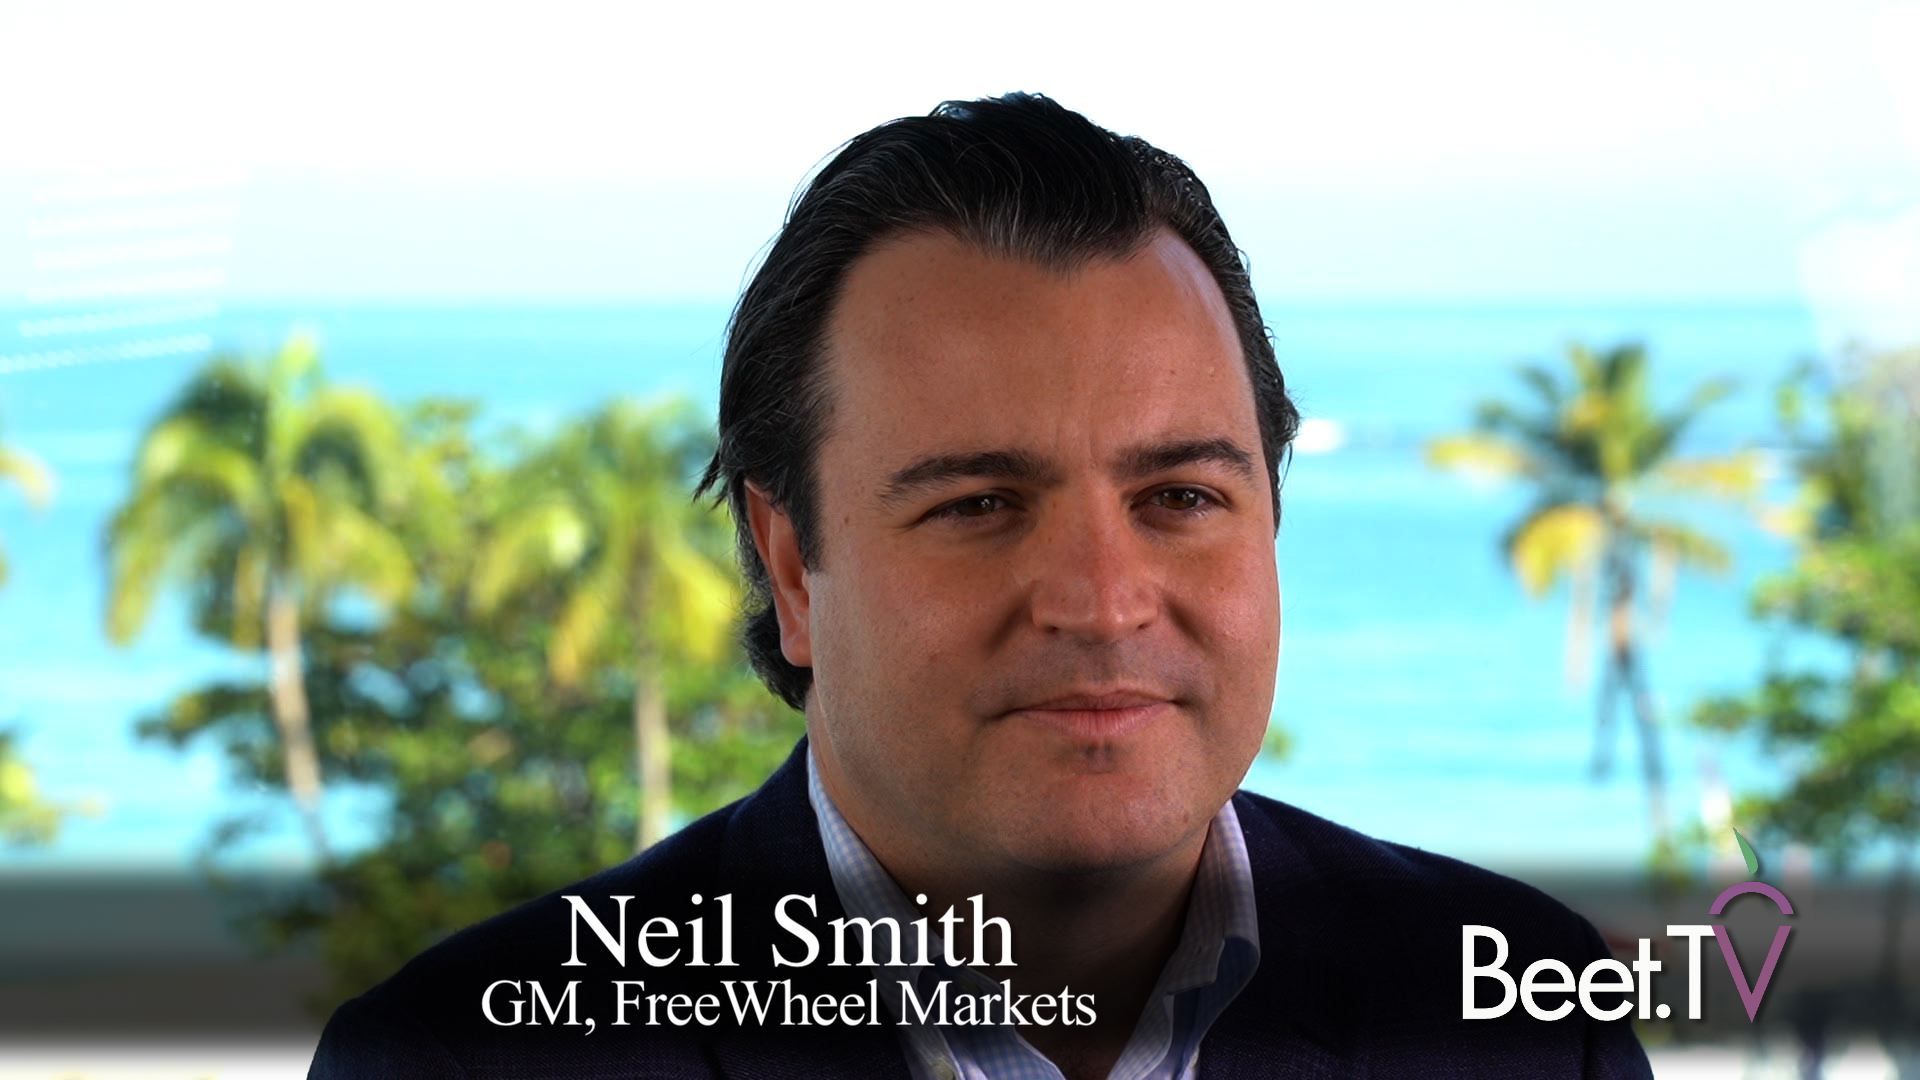 With Long-Tail TV Video Rising, Publishers Face ‘Exhaustive’ Vetting: FreeWheel’s Smith